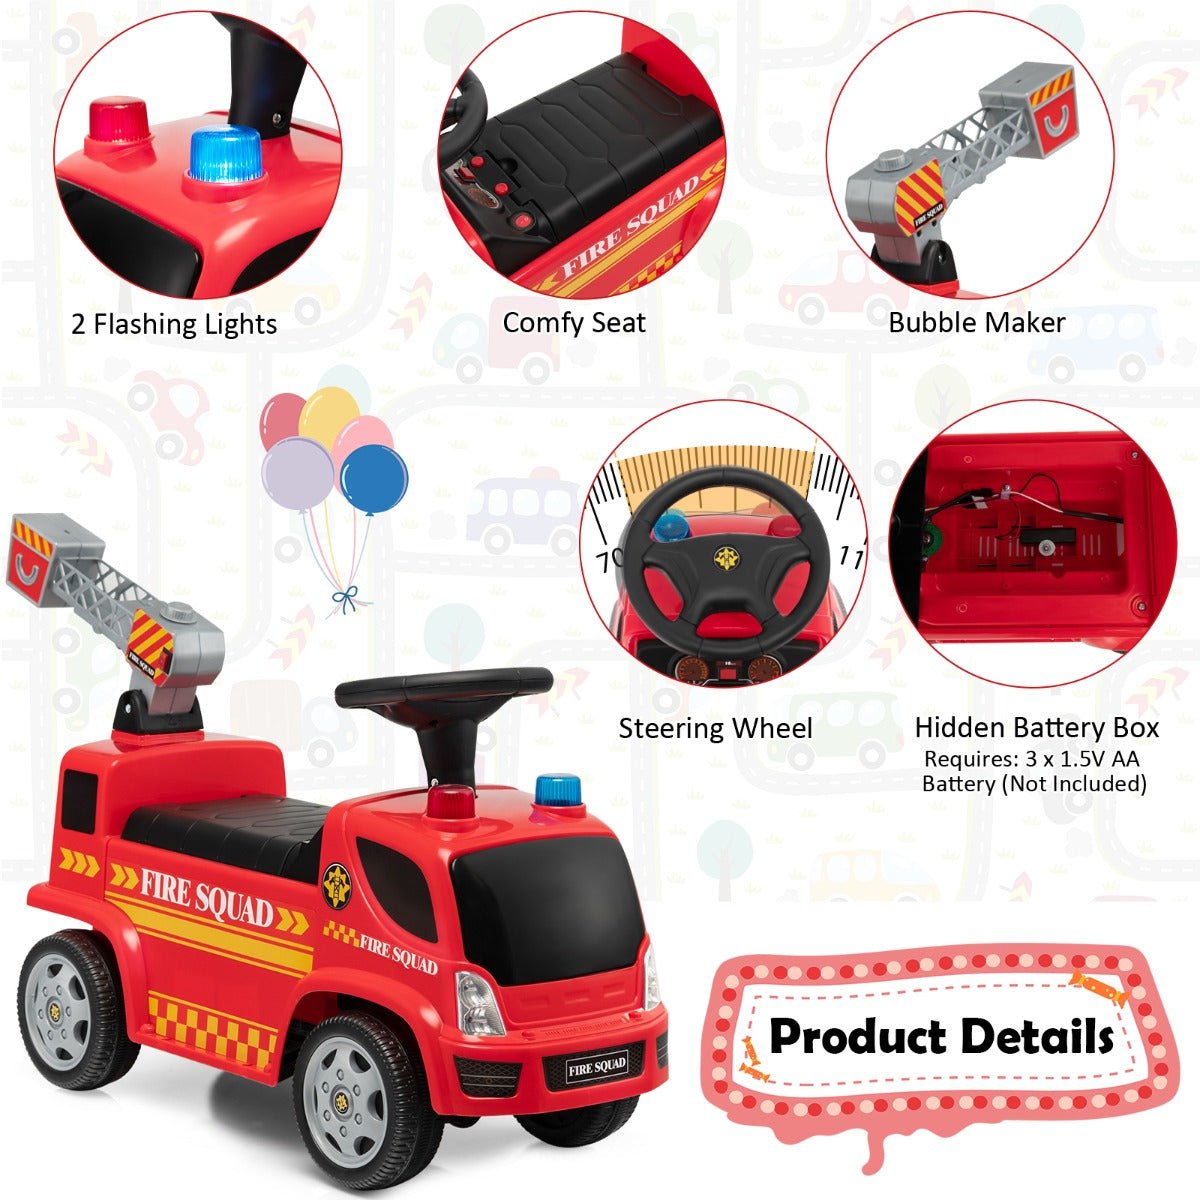 Exciting Red Ride-On Truck with Bubbles and Headlights